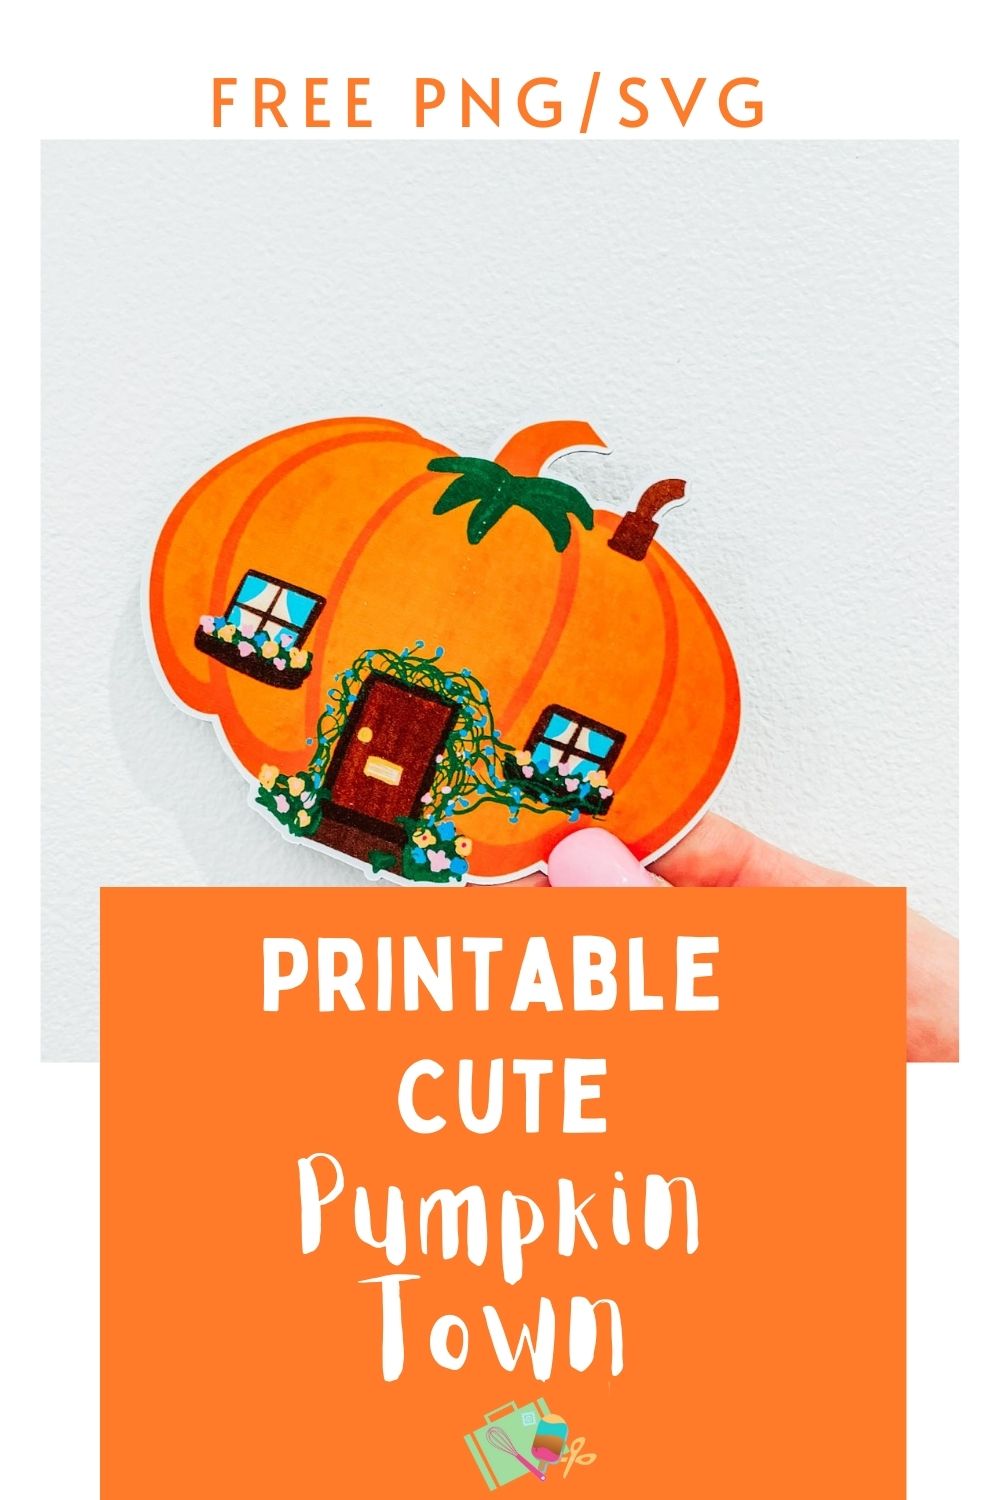 Free Printable Cut Pumpkins for Halloween Favours-2